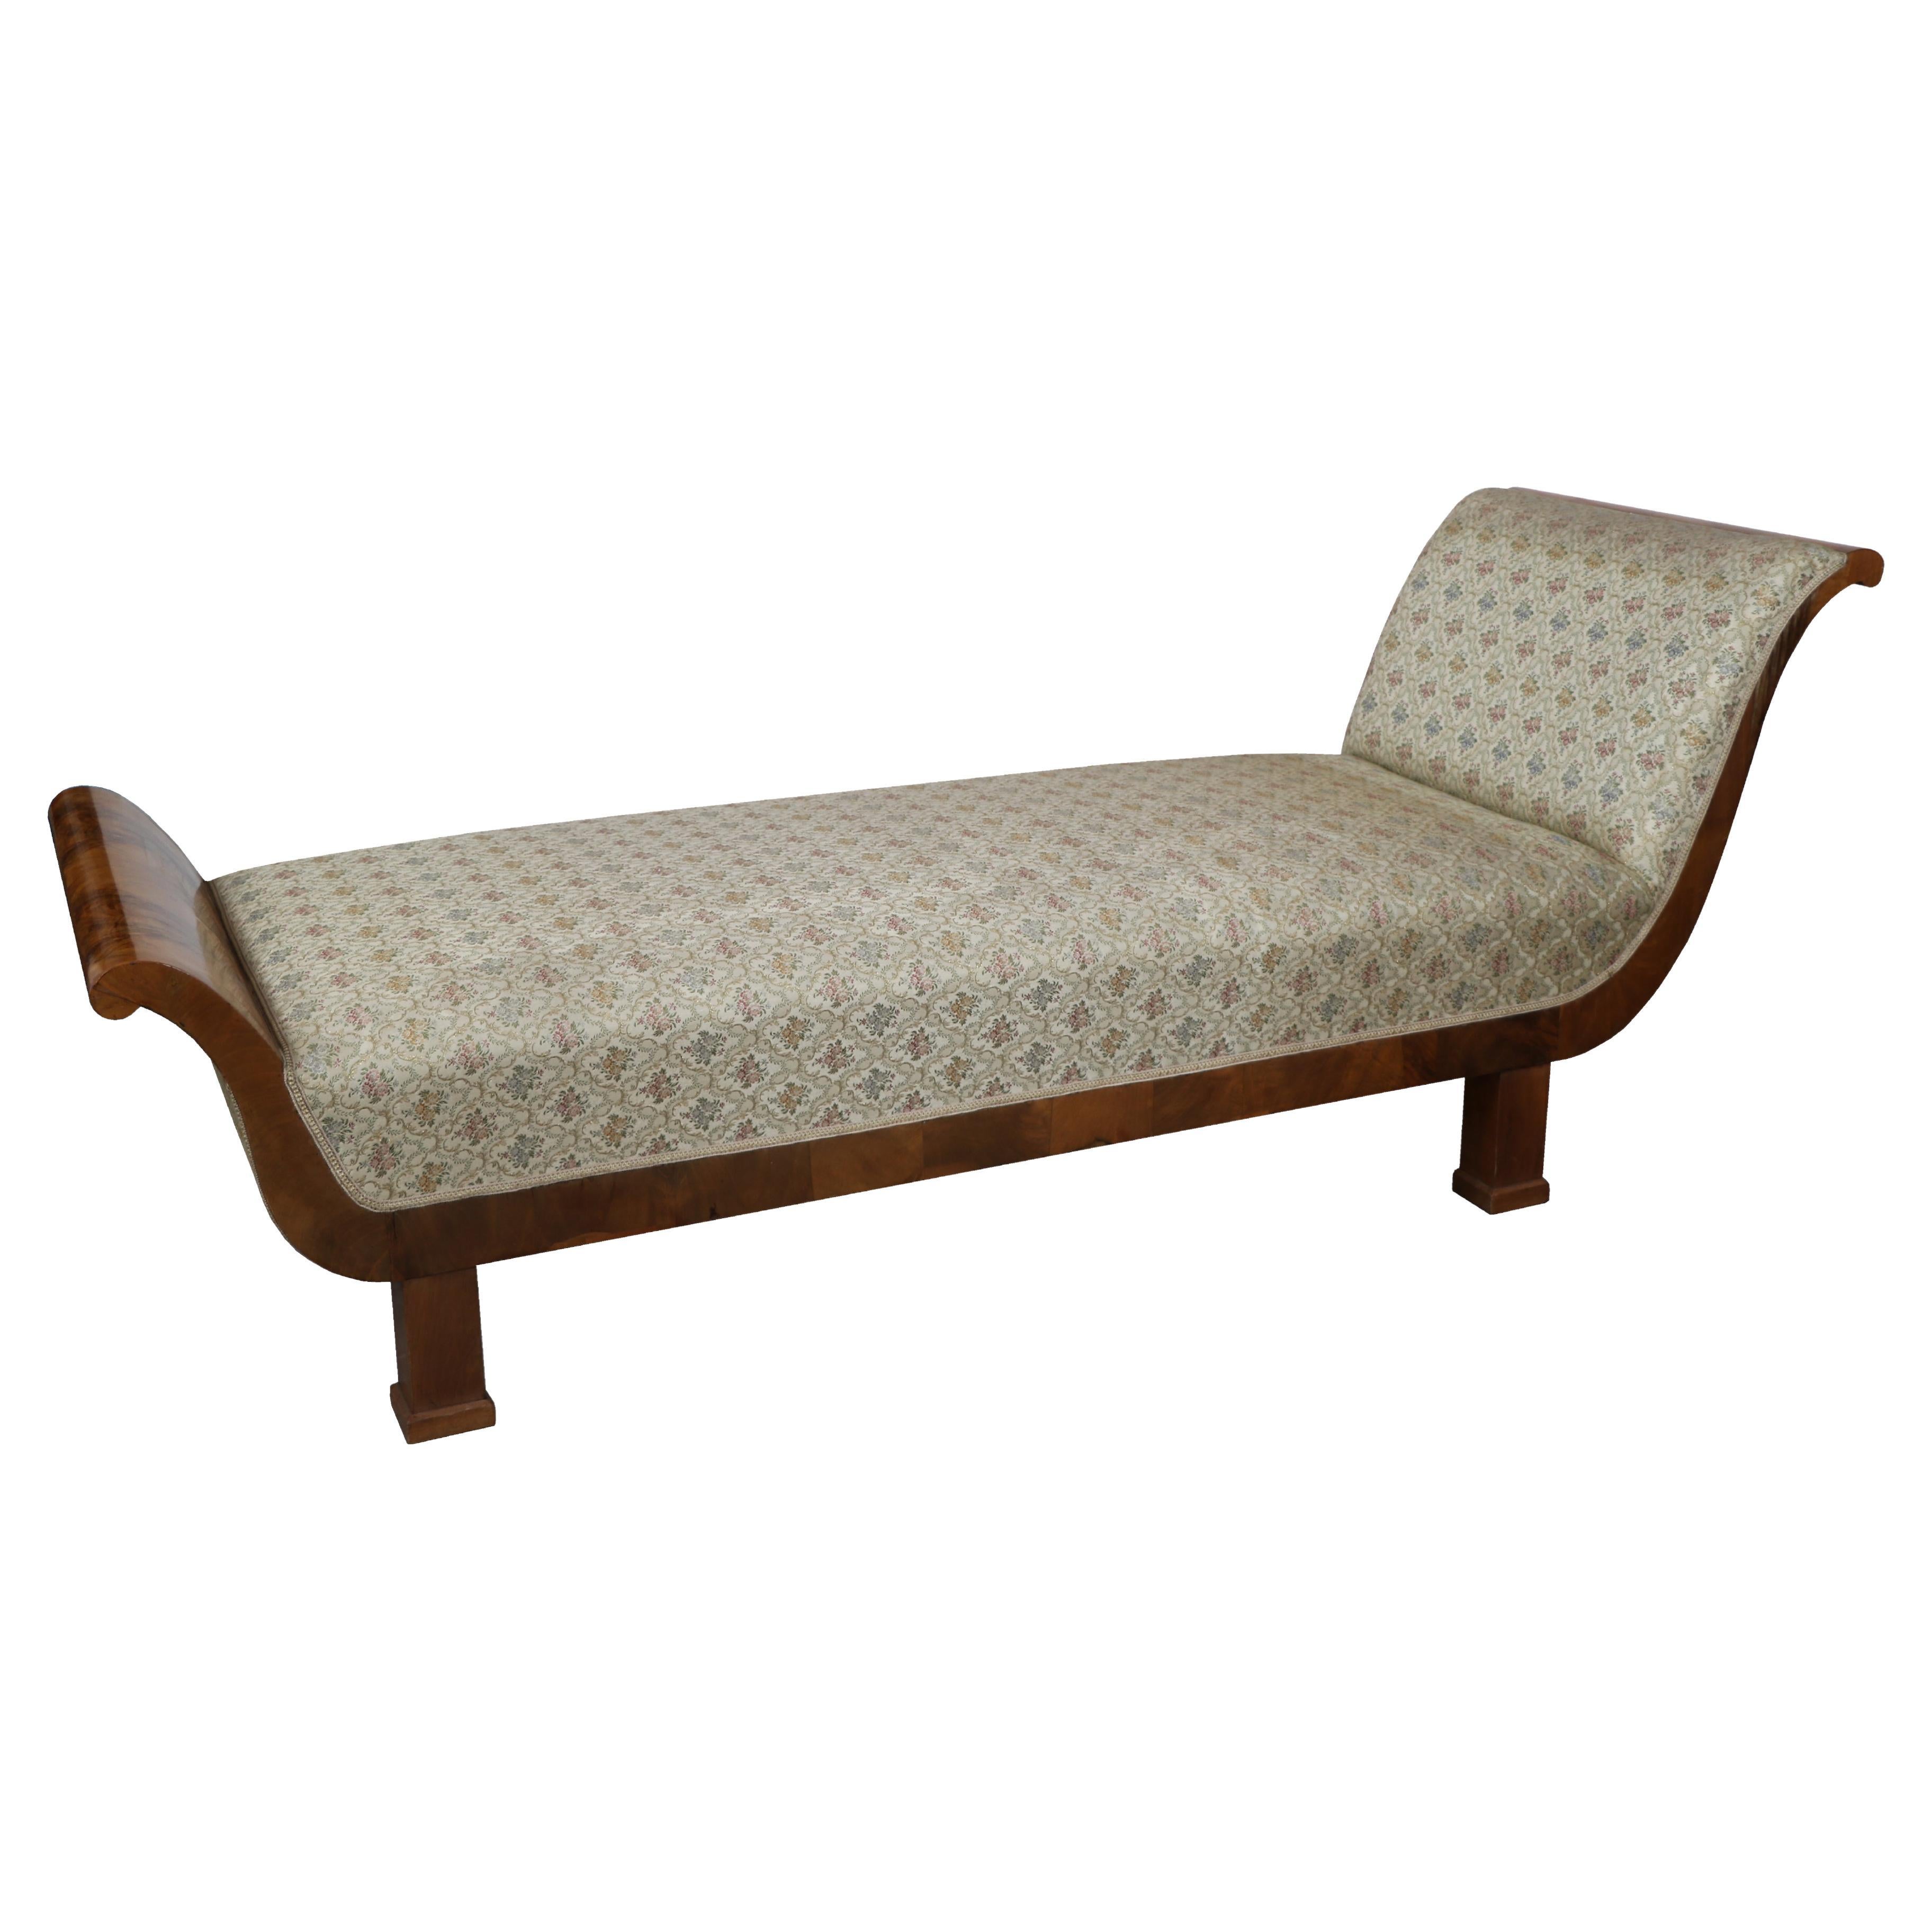 Hello,
This elegant and truly exceptional Viennese Biedermeier recamiere / daybed was made in circa 1825.

Viennese Biedermeier pieces are distinguished by their sophisticated proportions, rare and refined design, excellent craftsmanship and